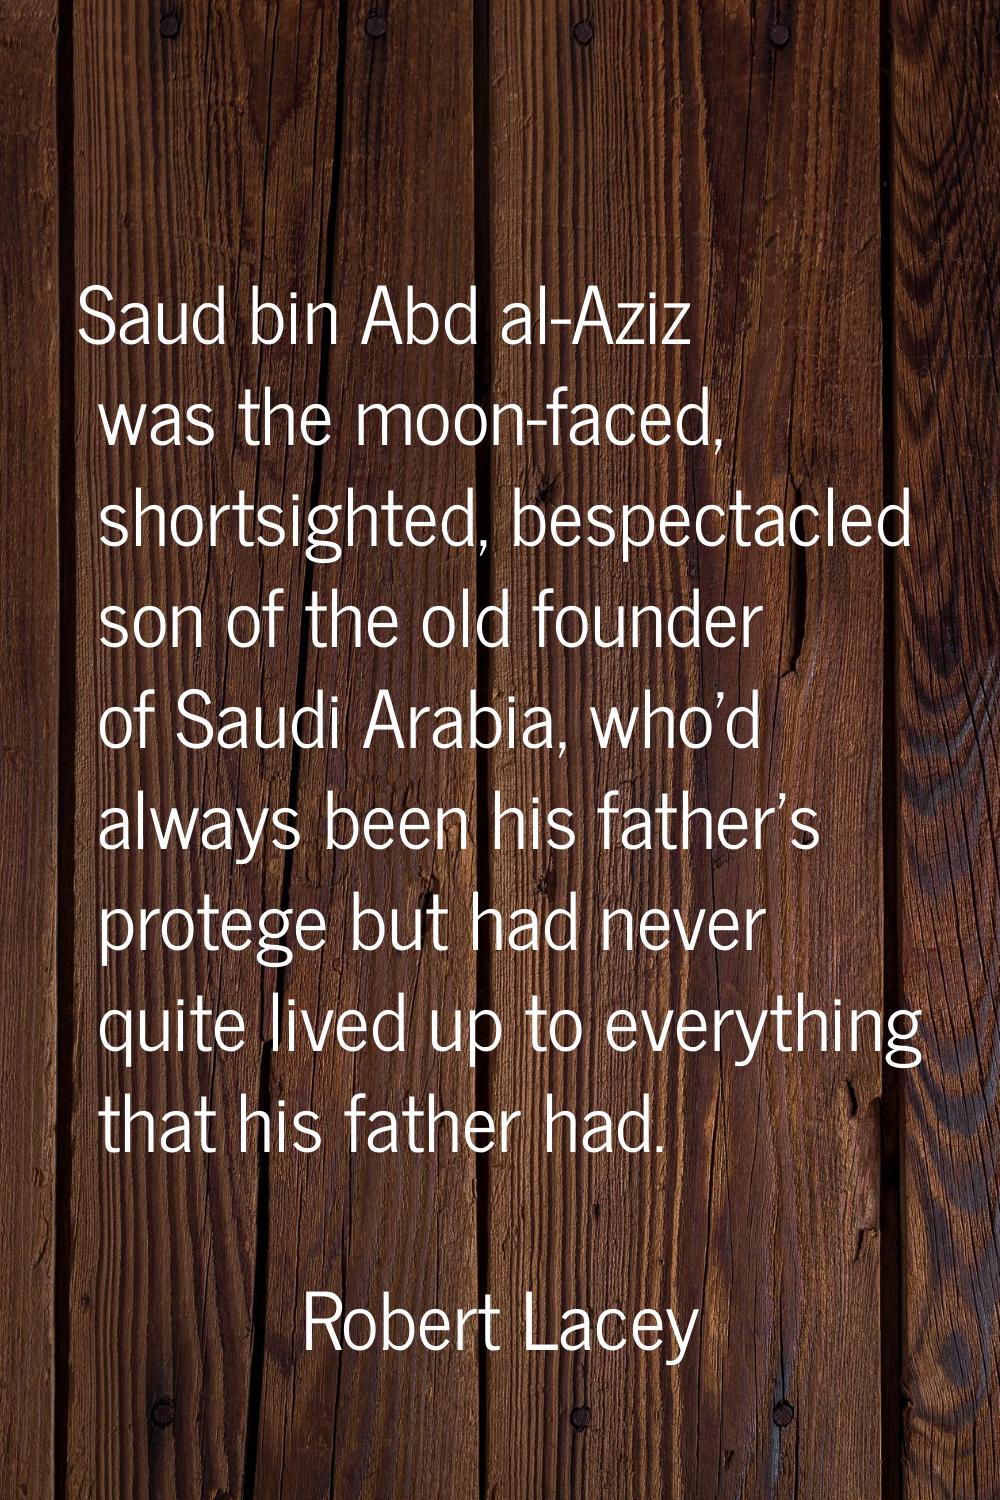 Saud bin Abd al-Aziz was the moon-faced, shortsighted, bespectacled son of the old founder of Saudi